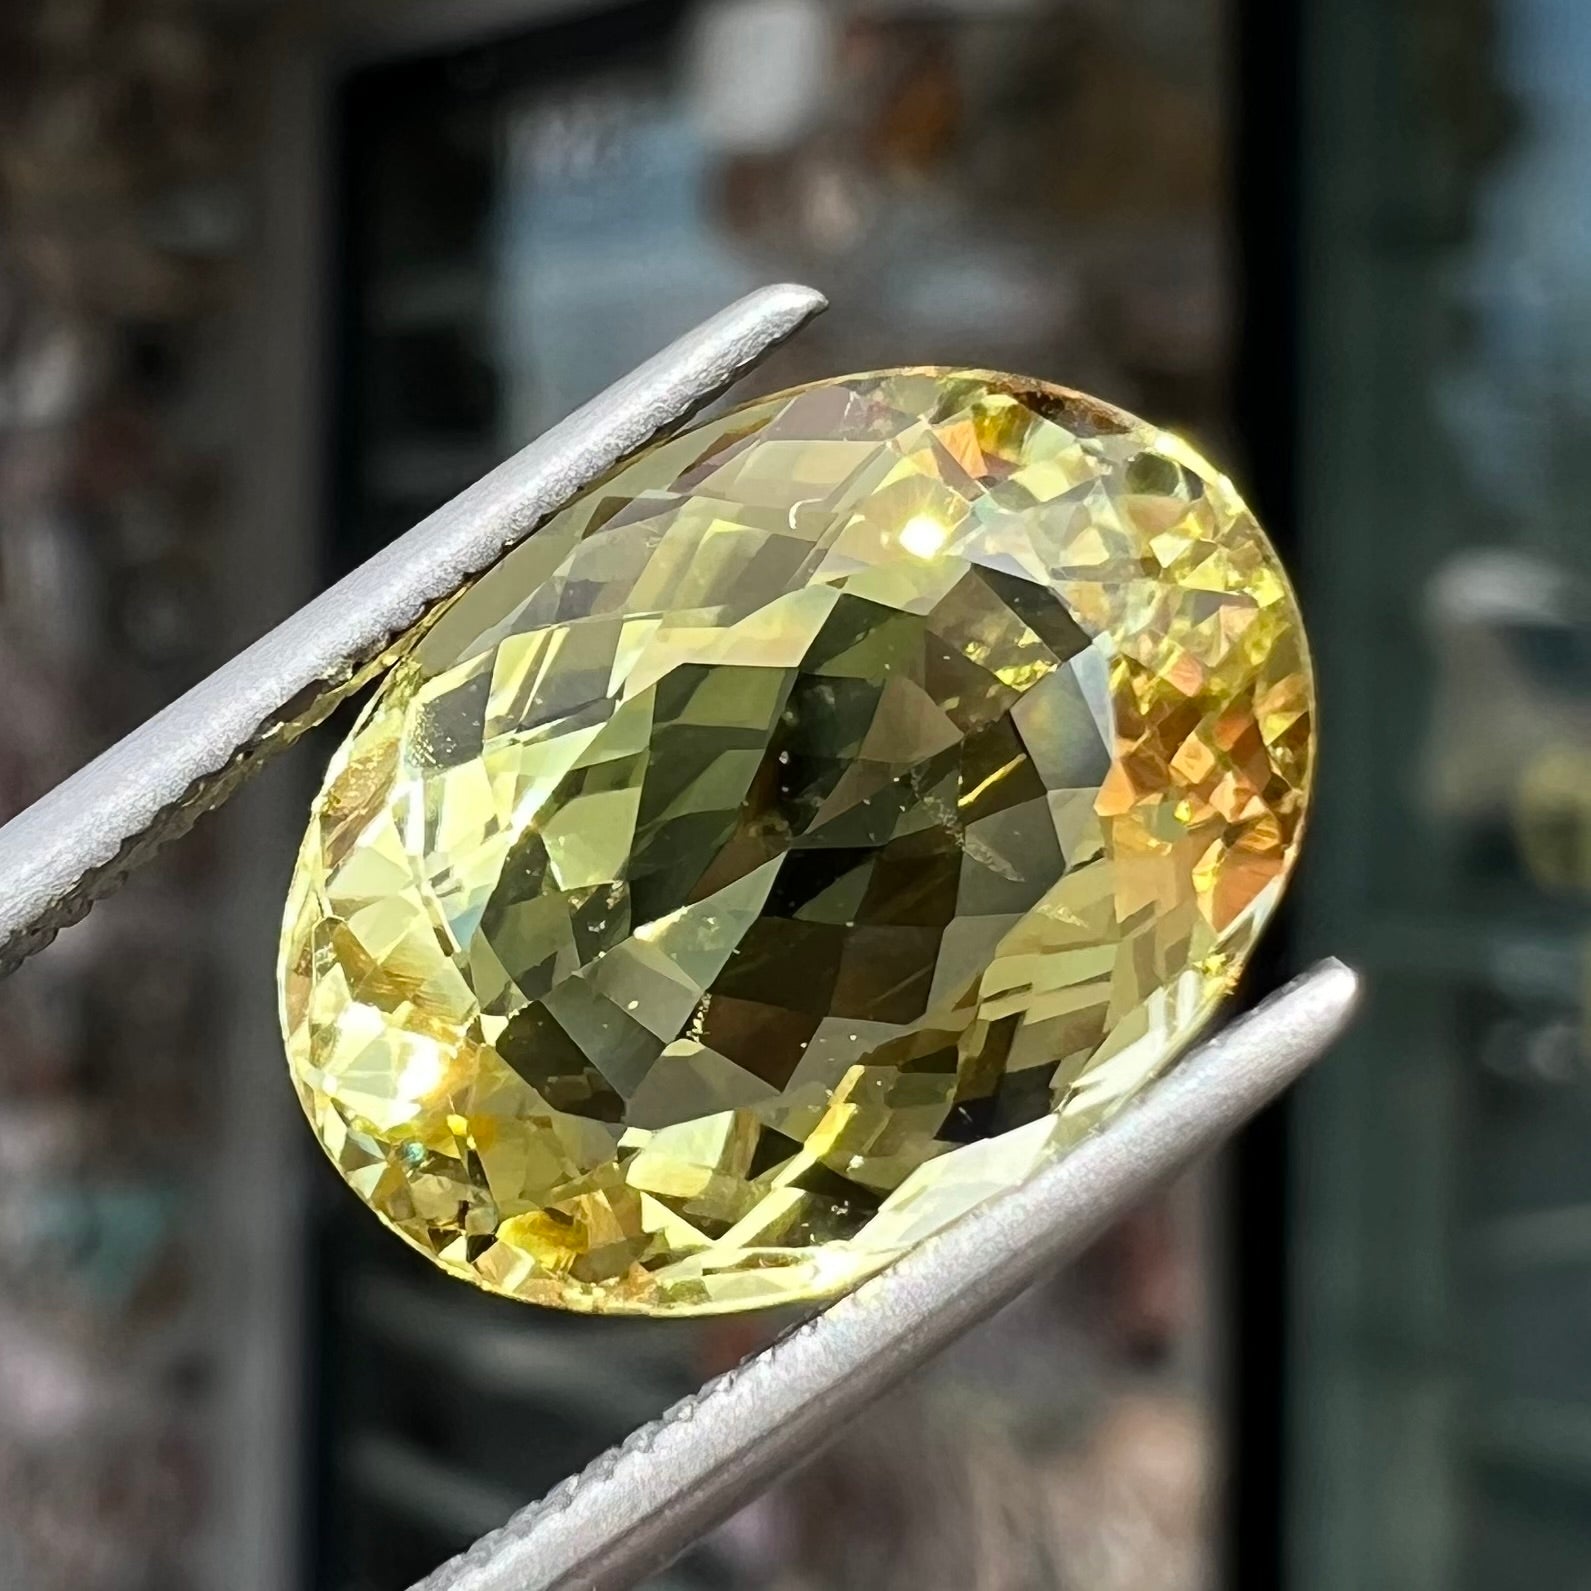 A faceted oval cut golden beryl gemstone.  The stone is a greenish light yellow.